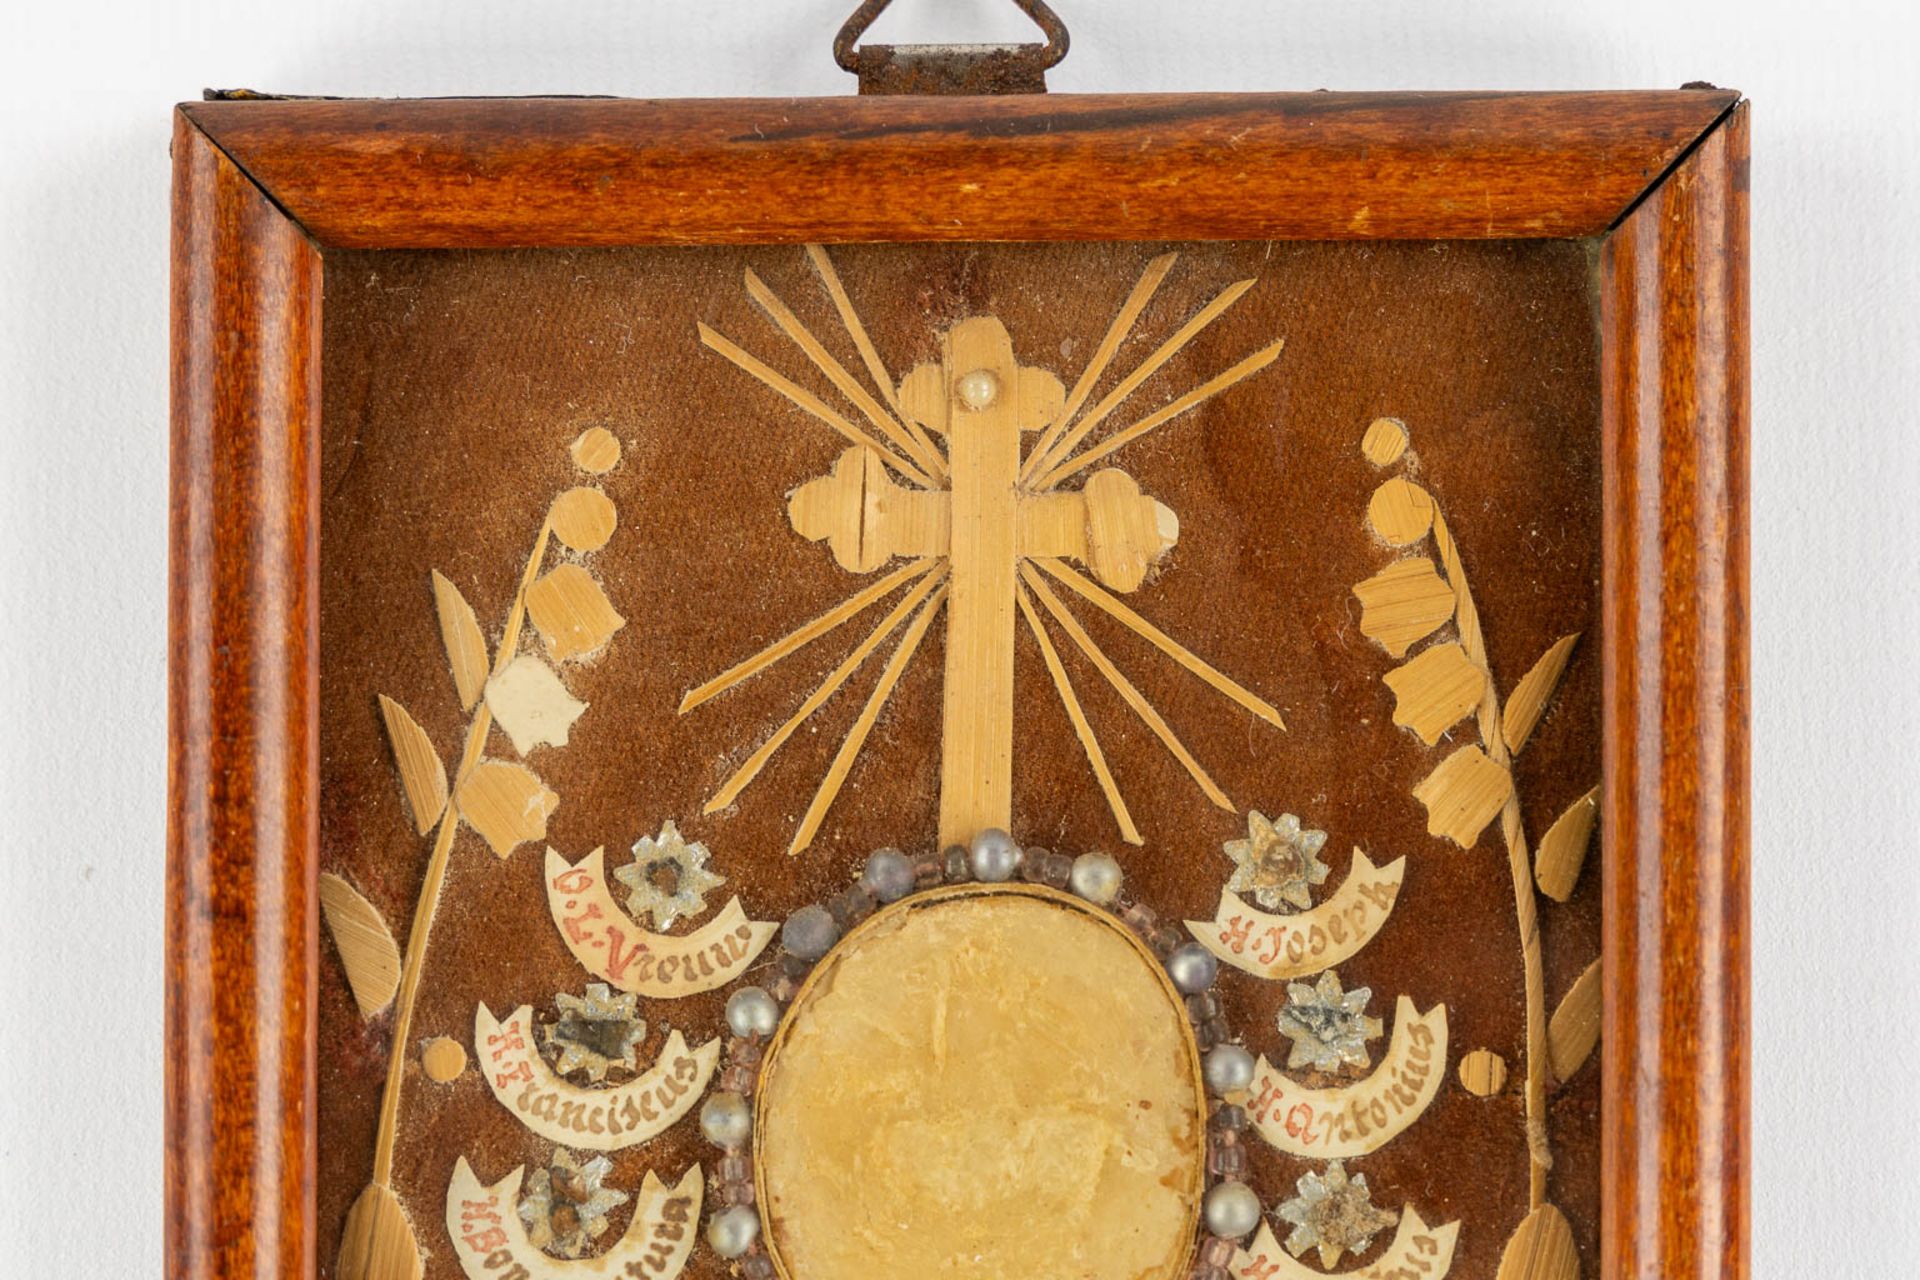 A small reliquary frame with 10 relics and an Agnus Dei. Our Lady, Clara, Colette, Anthony and more. - Image 3 of 6